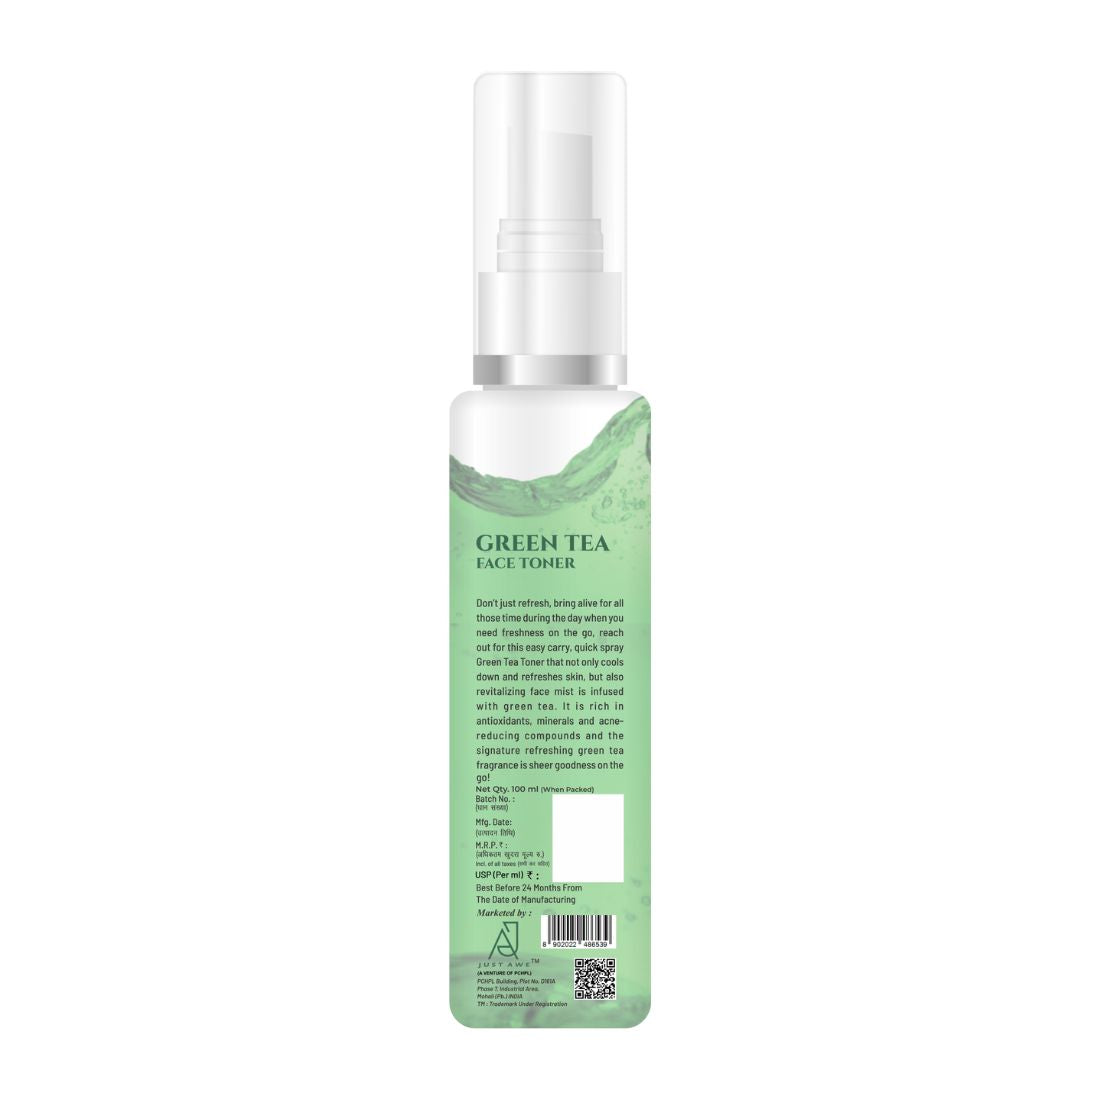 Just Awe Green Tea Toner- 100ml -Reduces Dryness And gives soothing texture